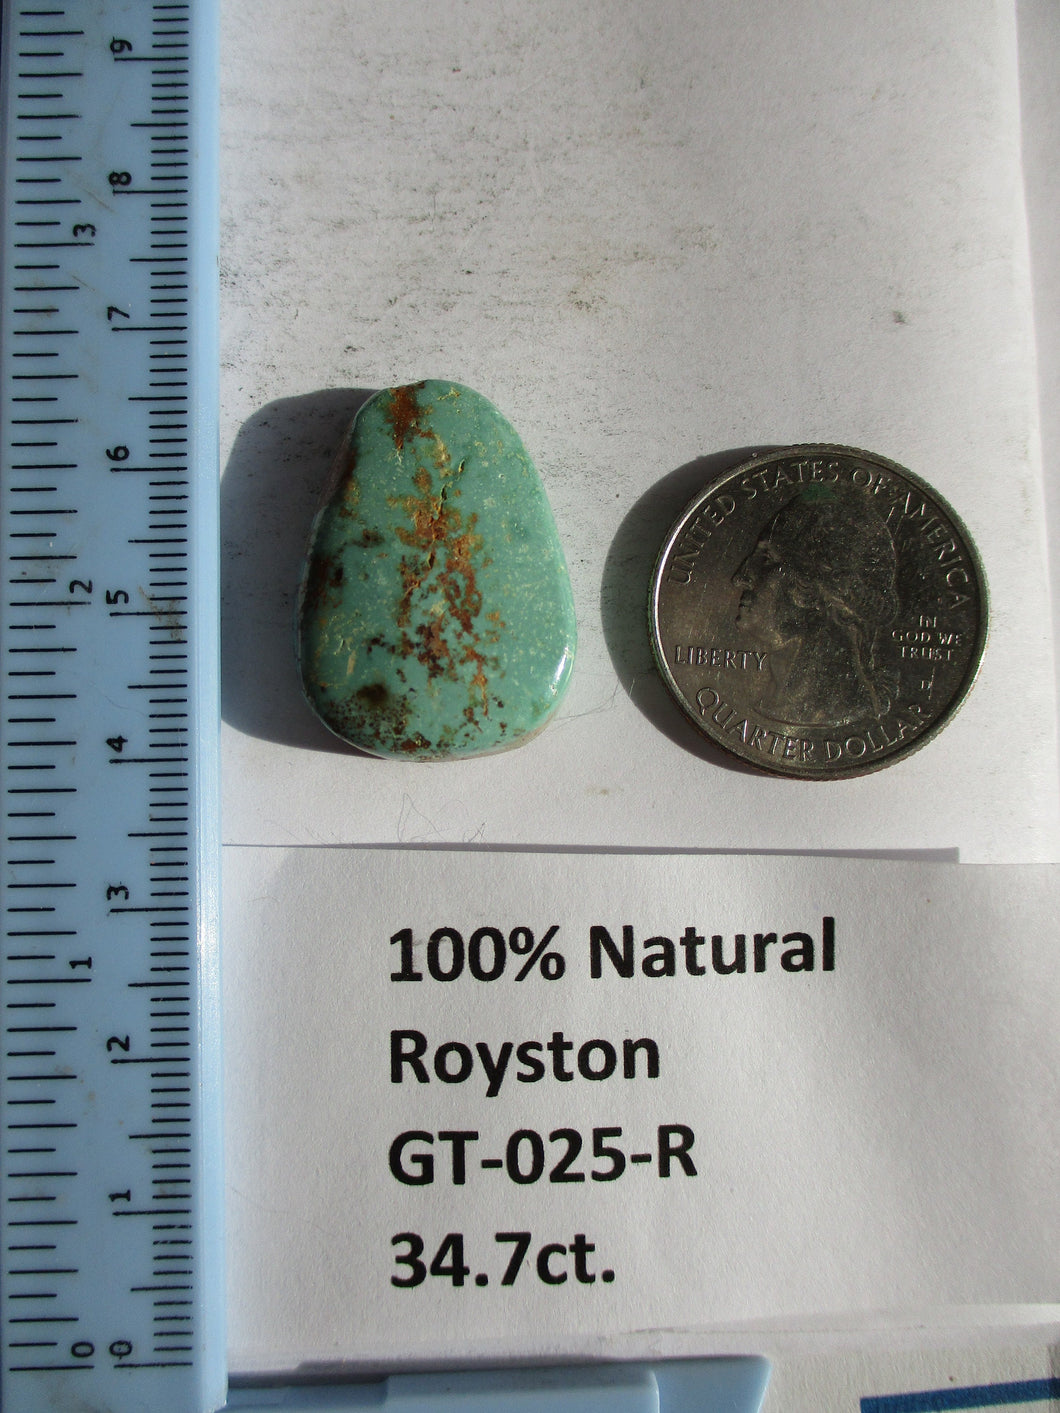 34.7 ct (27x20x7.5 mm) 100% Natural Royston Turquoise Cabochon Gemstone, GT 025